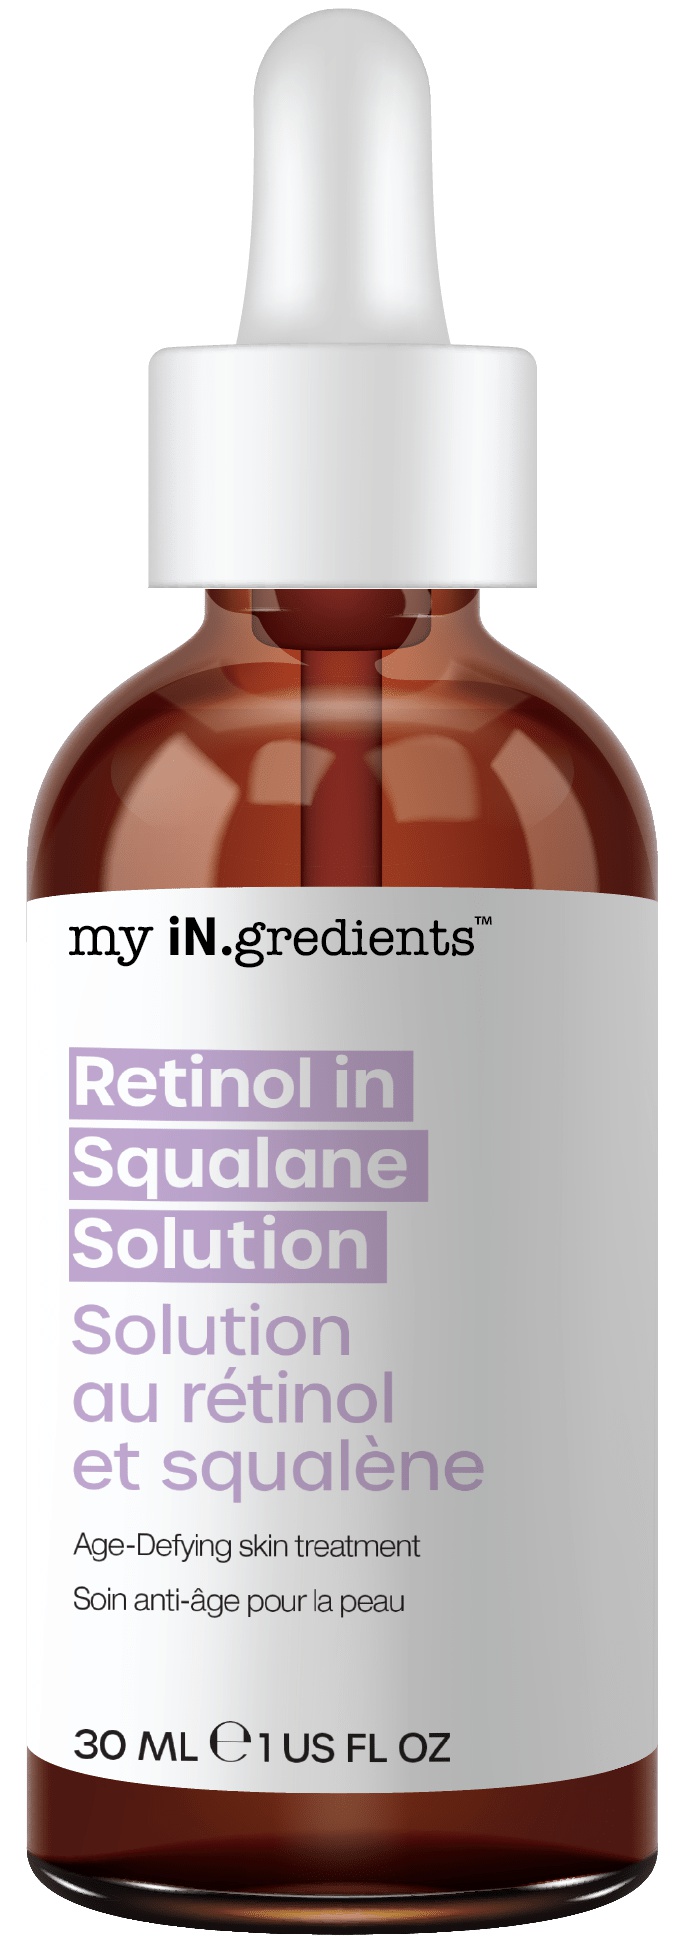 My in. gredients Retinol In Squalane